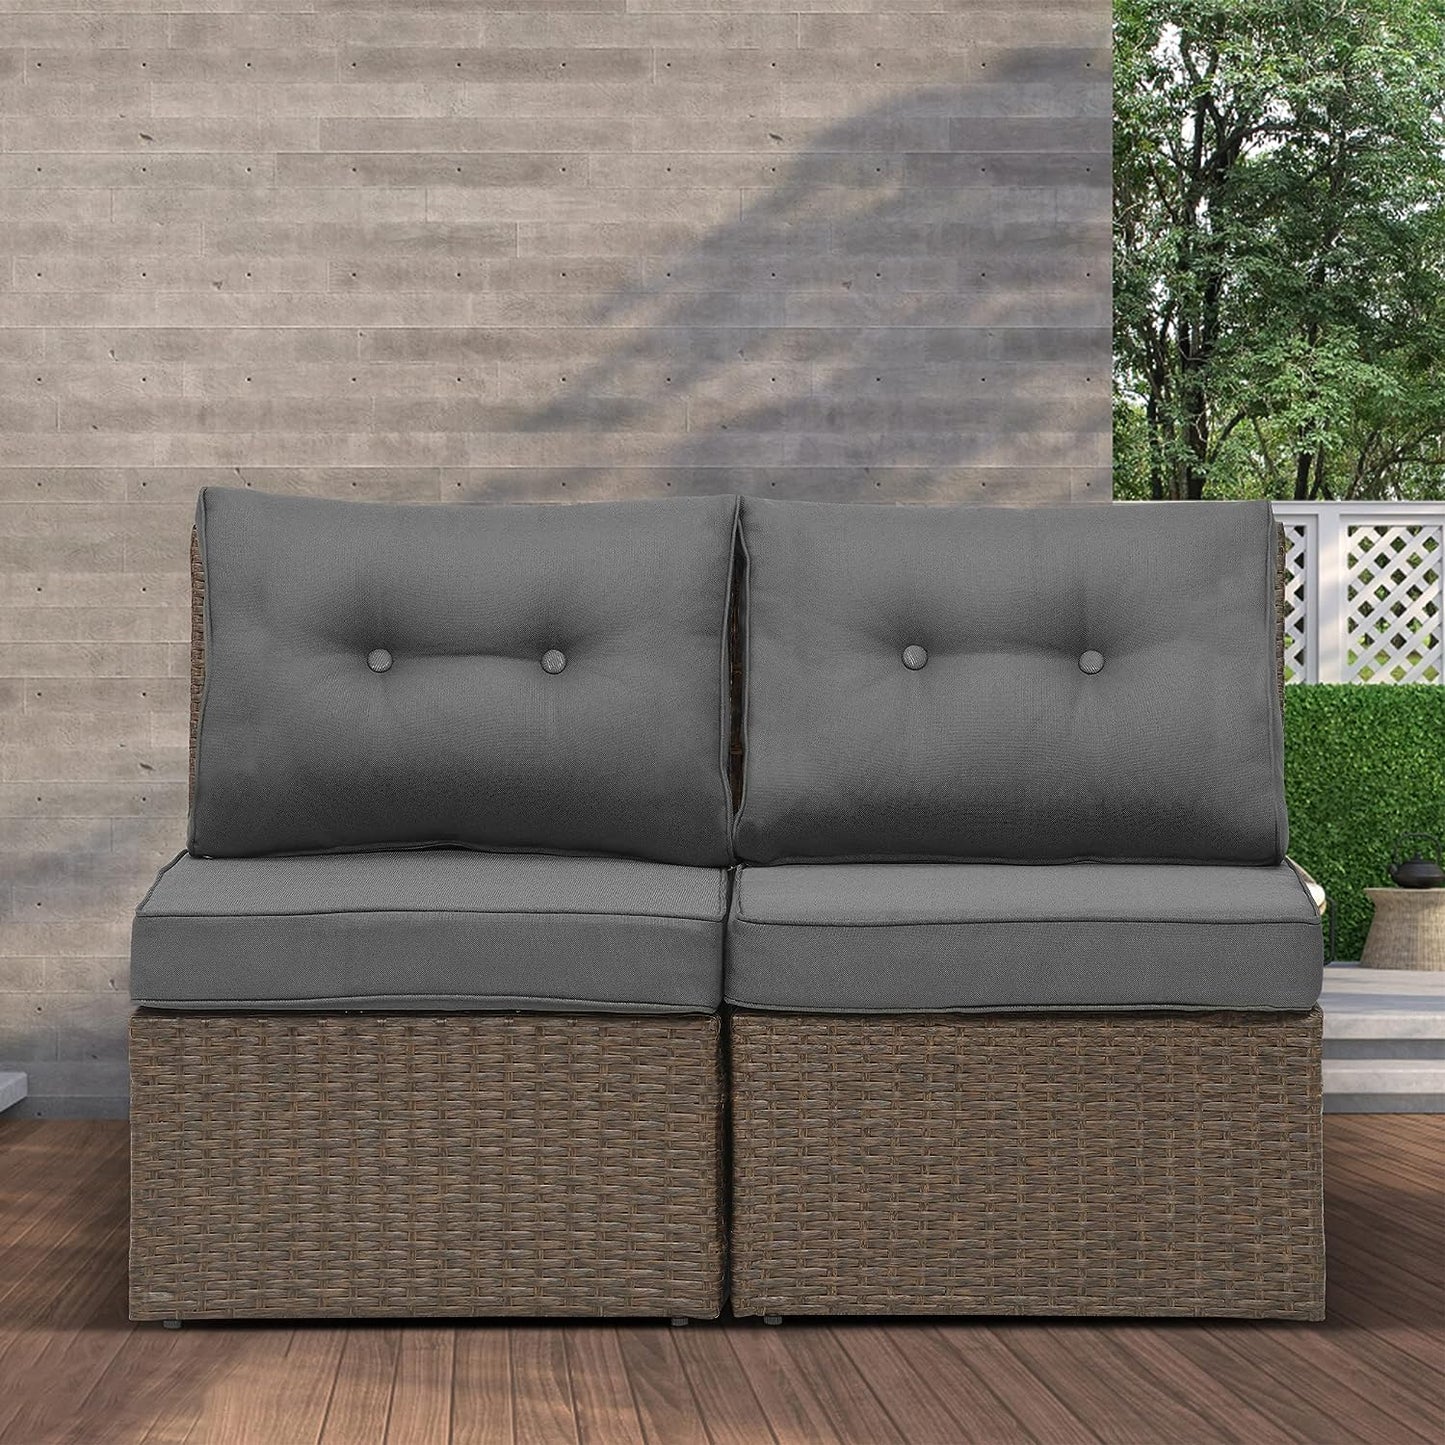 SUNVIVI OUTDOOR Brown Wicker Patio Sofa Chair Armless with Dark Grey Cushions, Aluminum Frame Small Outdoor Couch Chair for Garden Backyard Pool,2 Pieces